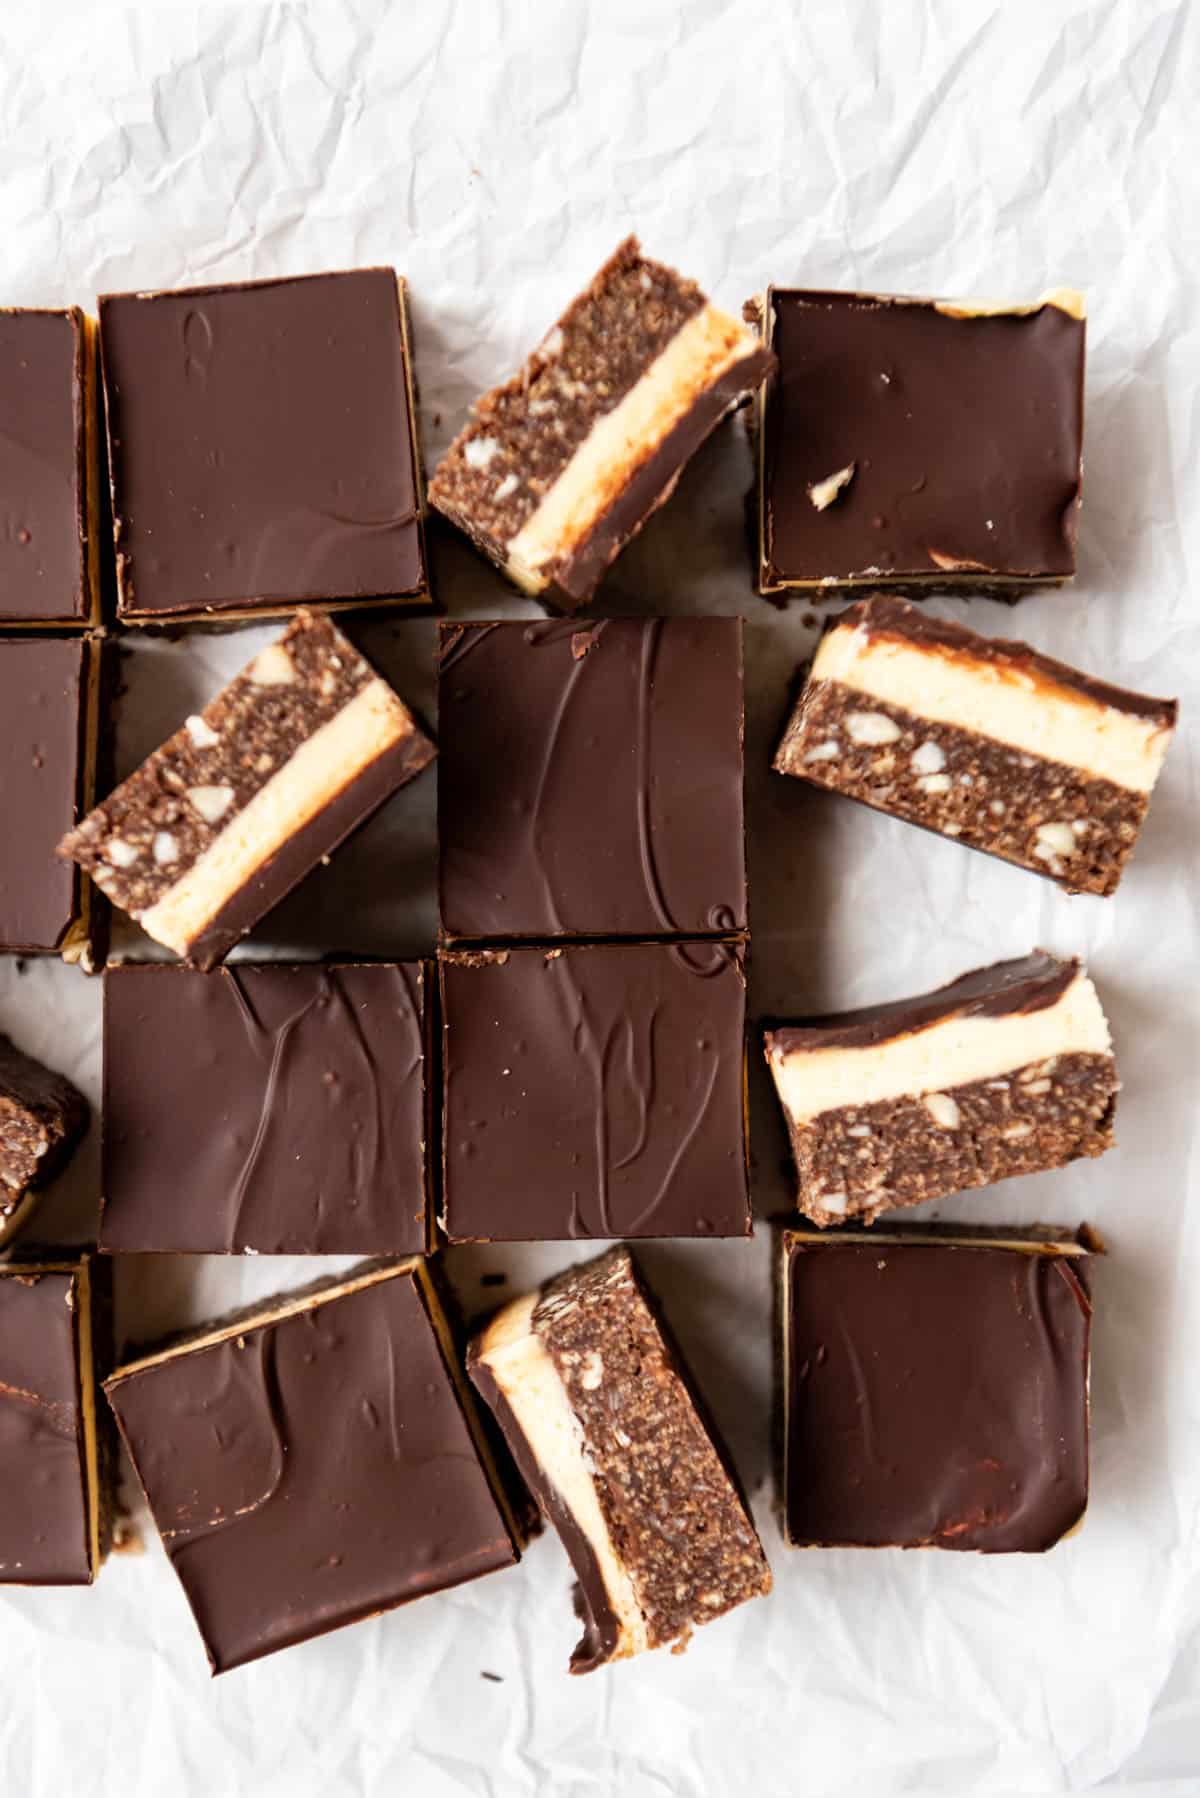 Nanaimo bar treats arranged haphazardly on crumpled white parchment paper.